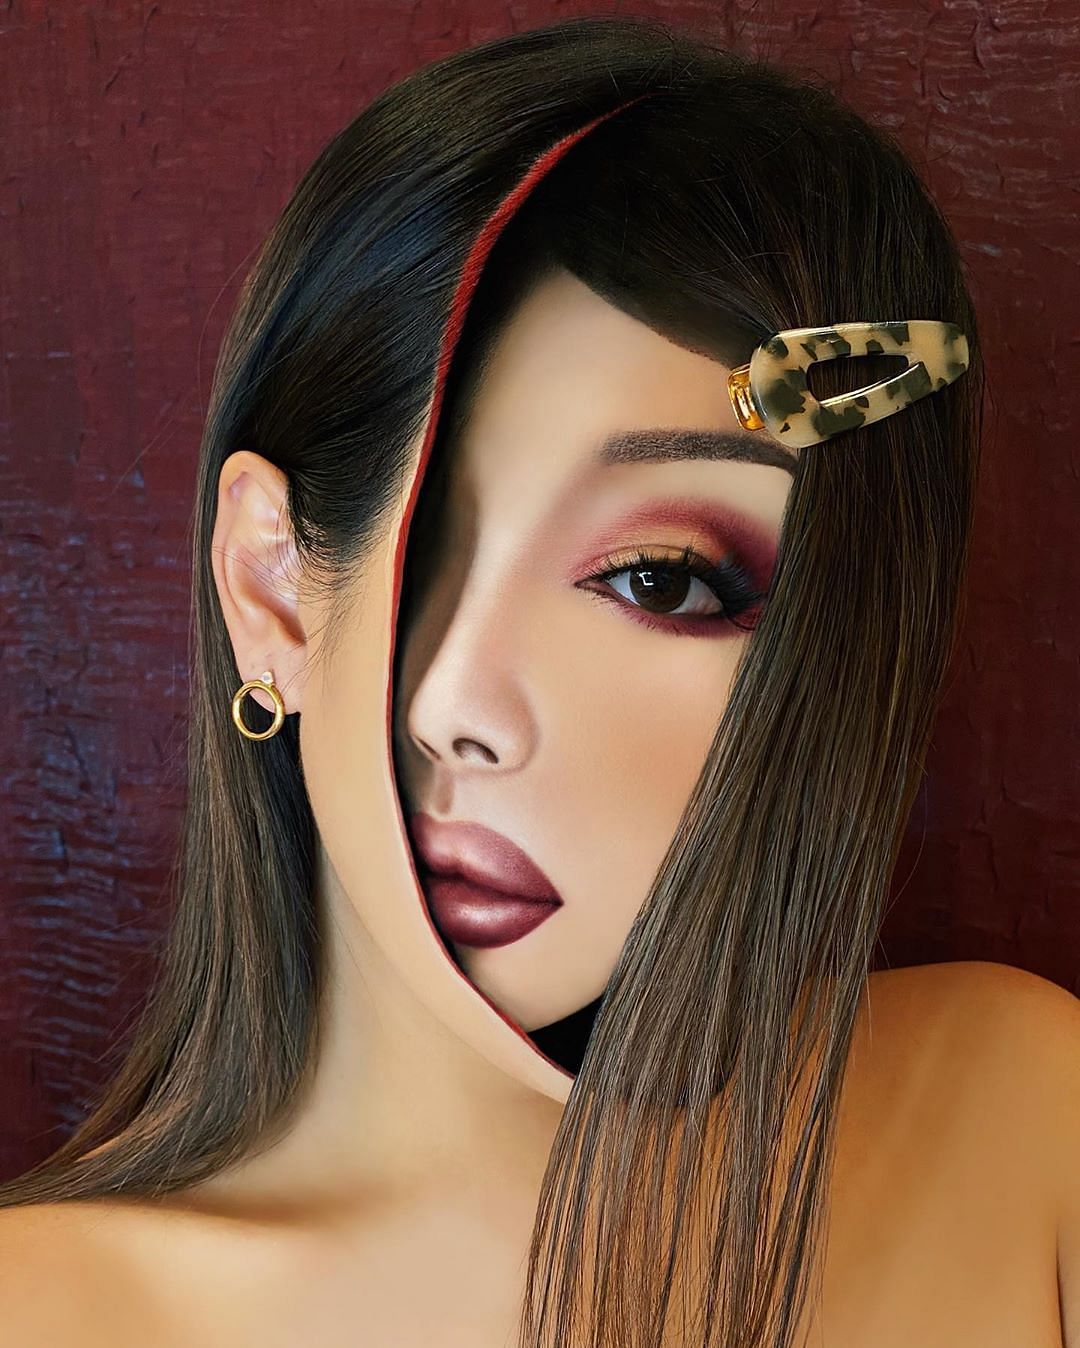 hilarious artwork of mimi choi on makeup people got confused